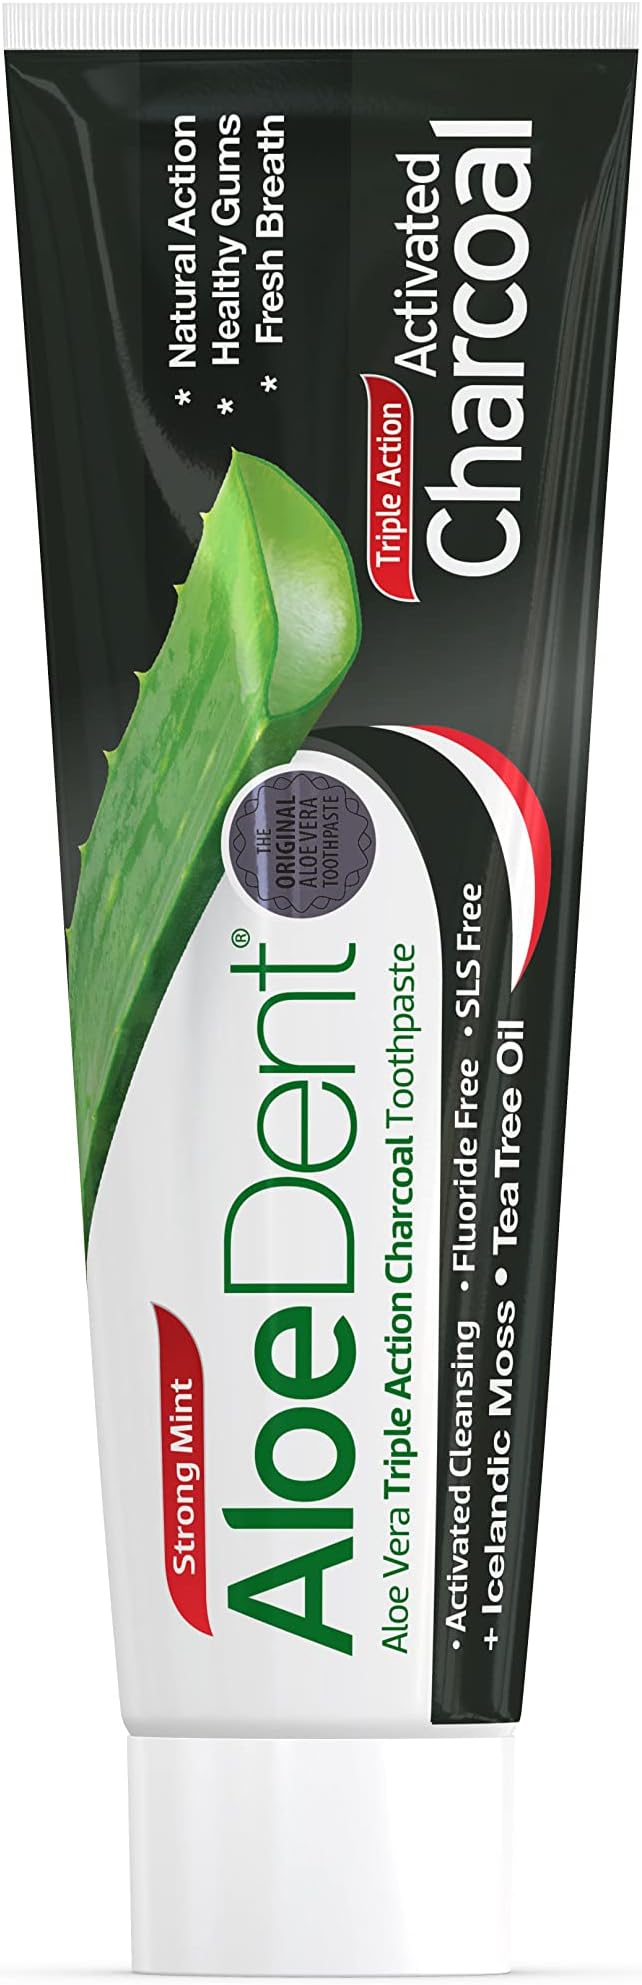 Toothpaste Activated Charcoal 100ml